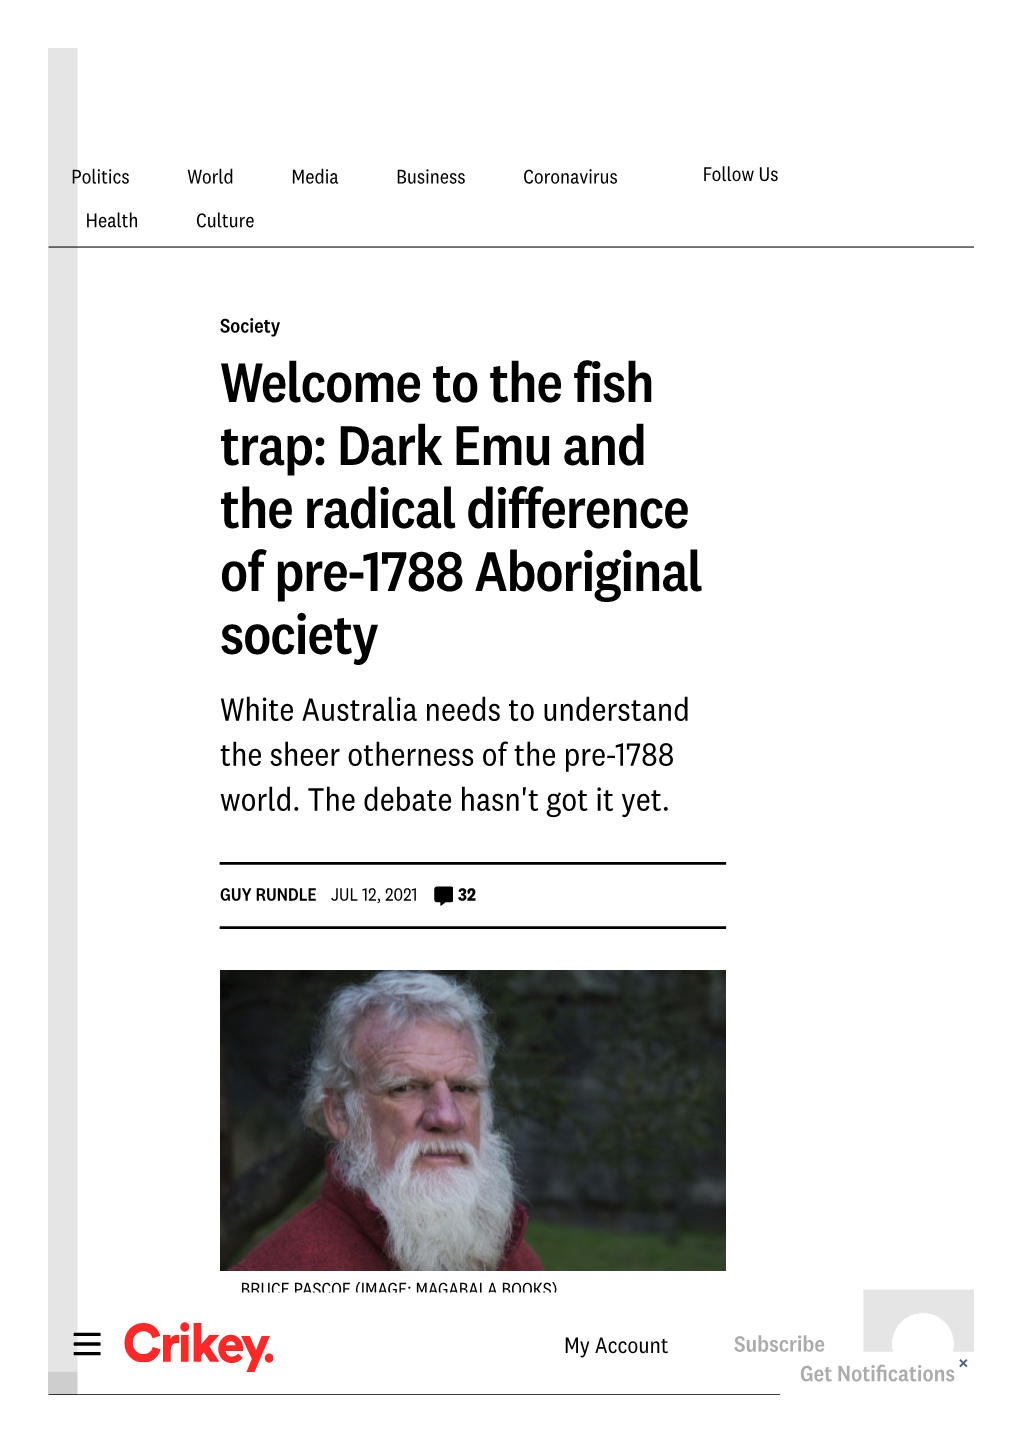 Dark Emu and the Radical Difference of Pre-1788 Aboriginal Society White Australia Needs to Understand the Sheer Otherness of the Pre-1788 World